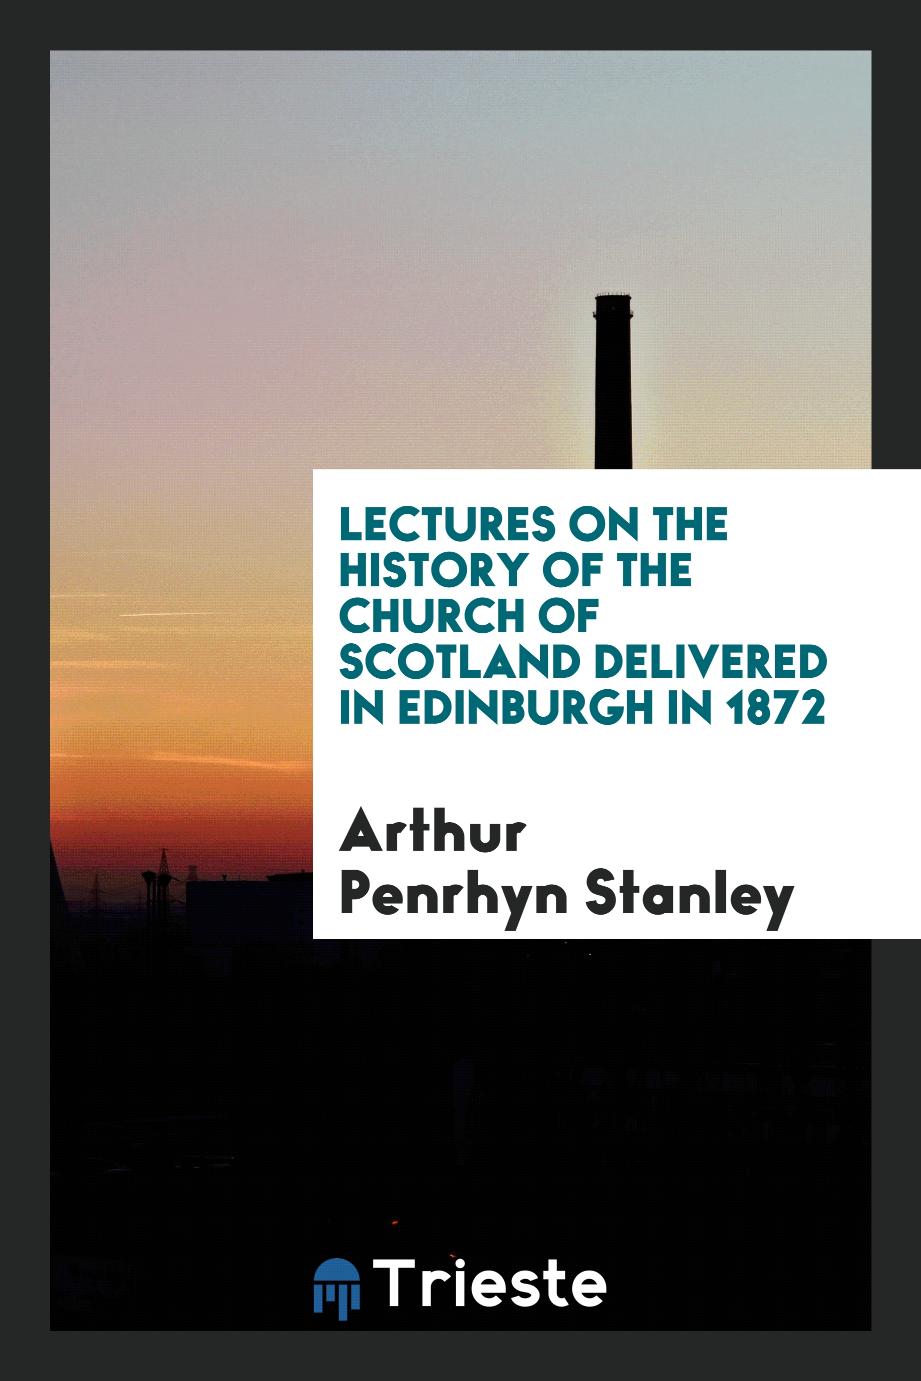 Lectures on the History of the Church of Scotland Delivered in Edinburgh in 1872